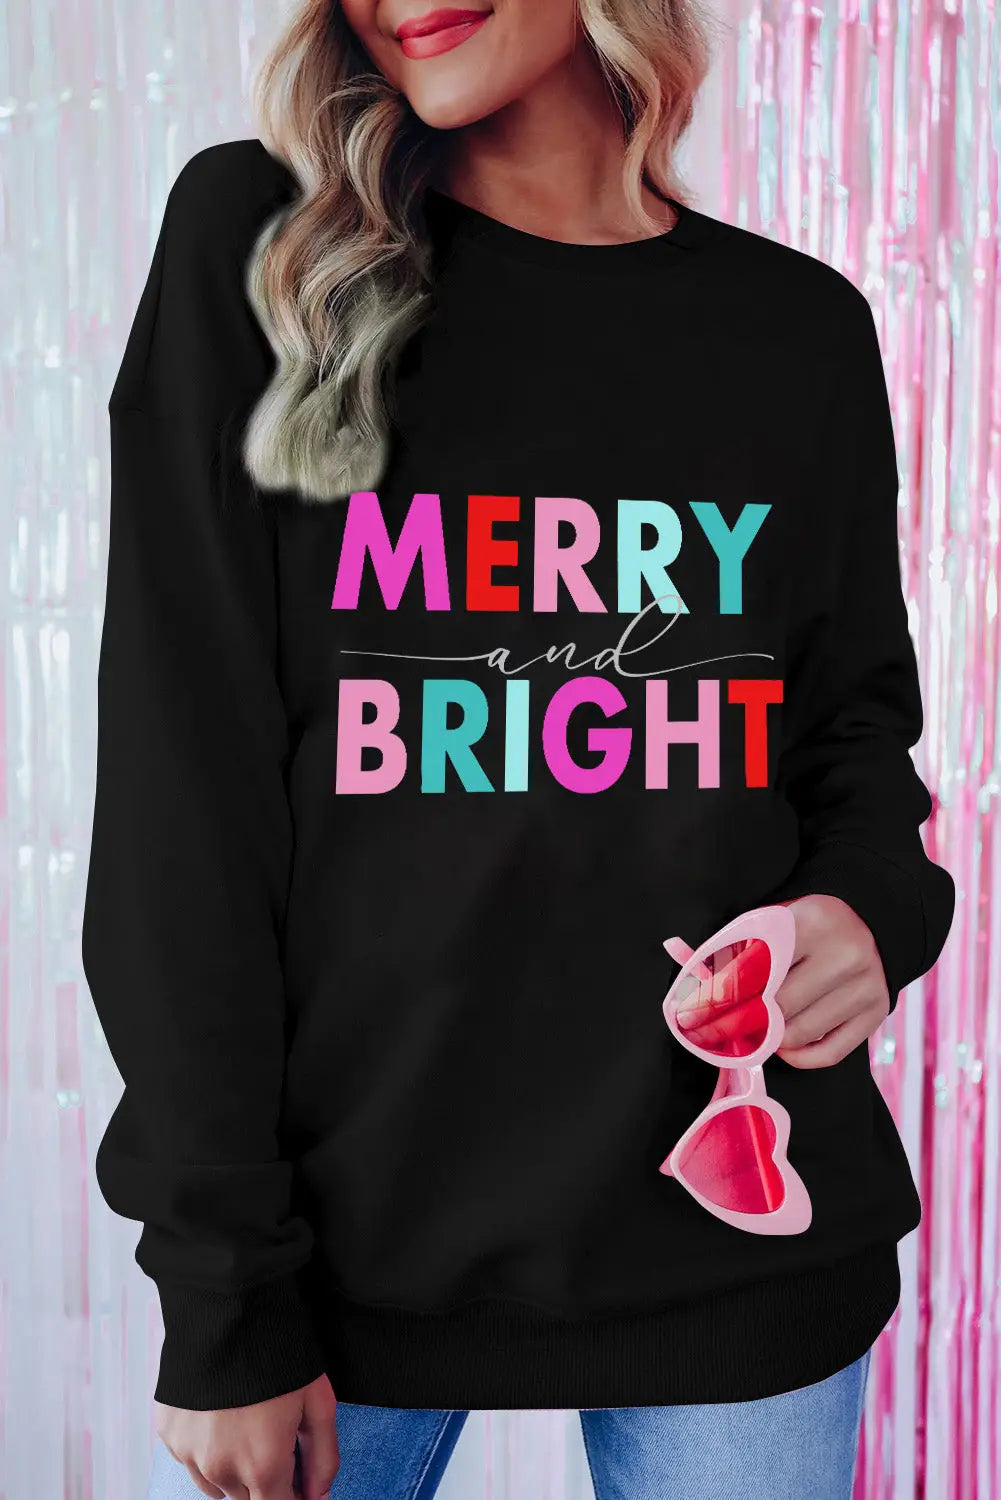 Black colorful merry and bright graphic sweatshirt - 2xl / 70% polyester + 30% cotton - sweatshirts